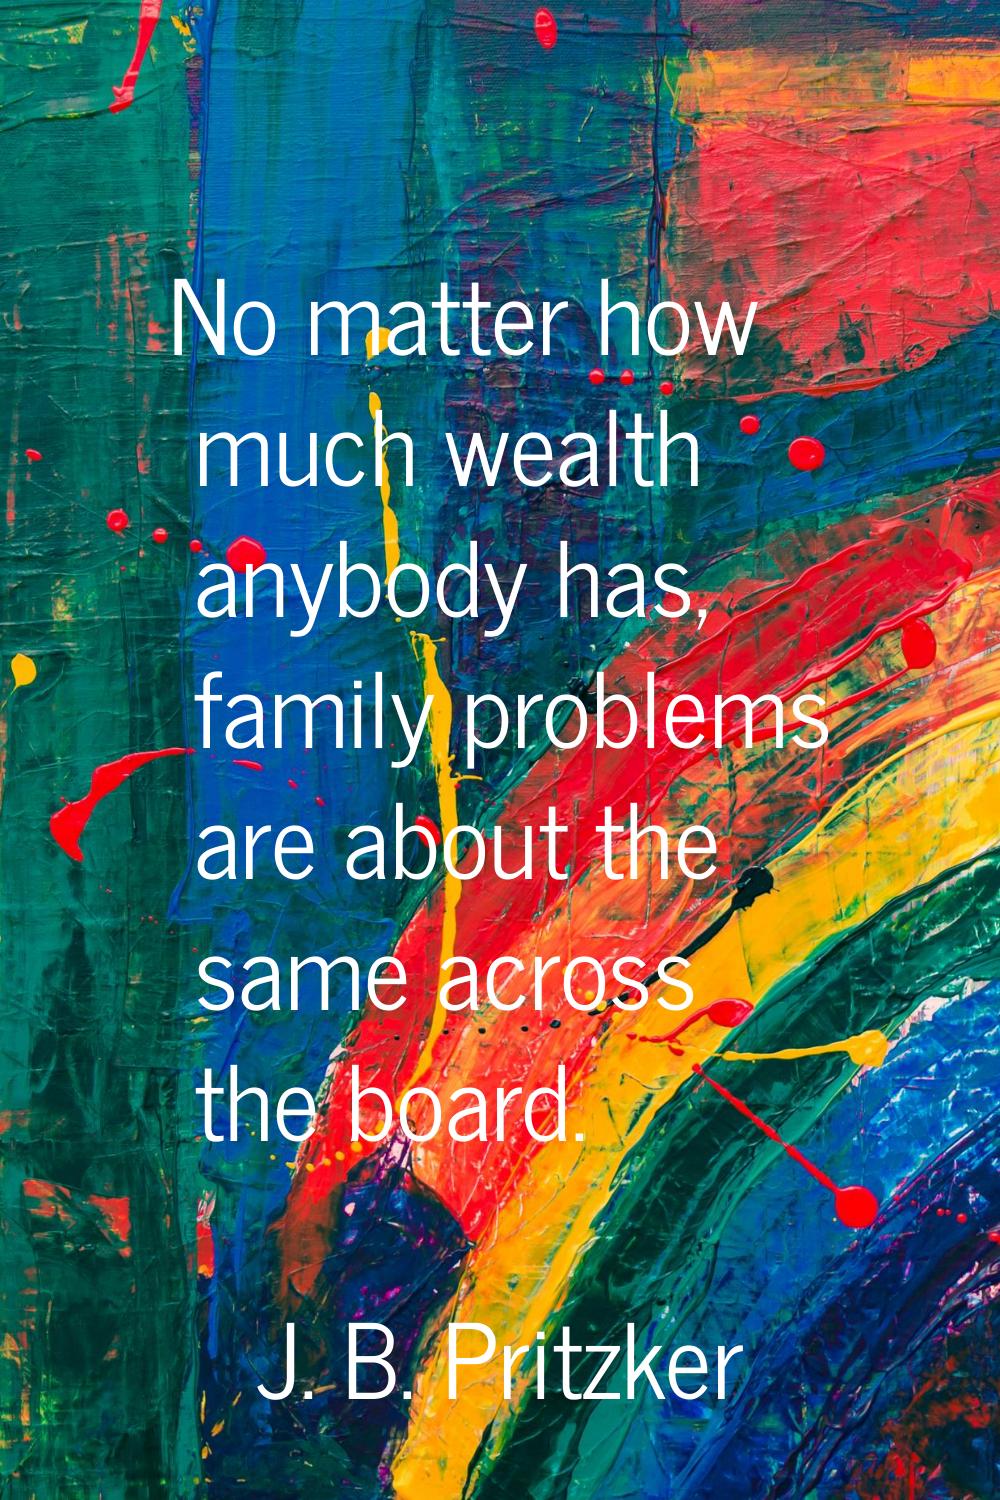 No matter how much wealth anybody has, family problems are about the same across the board.